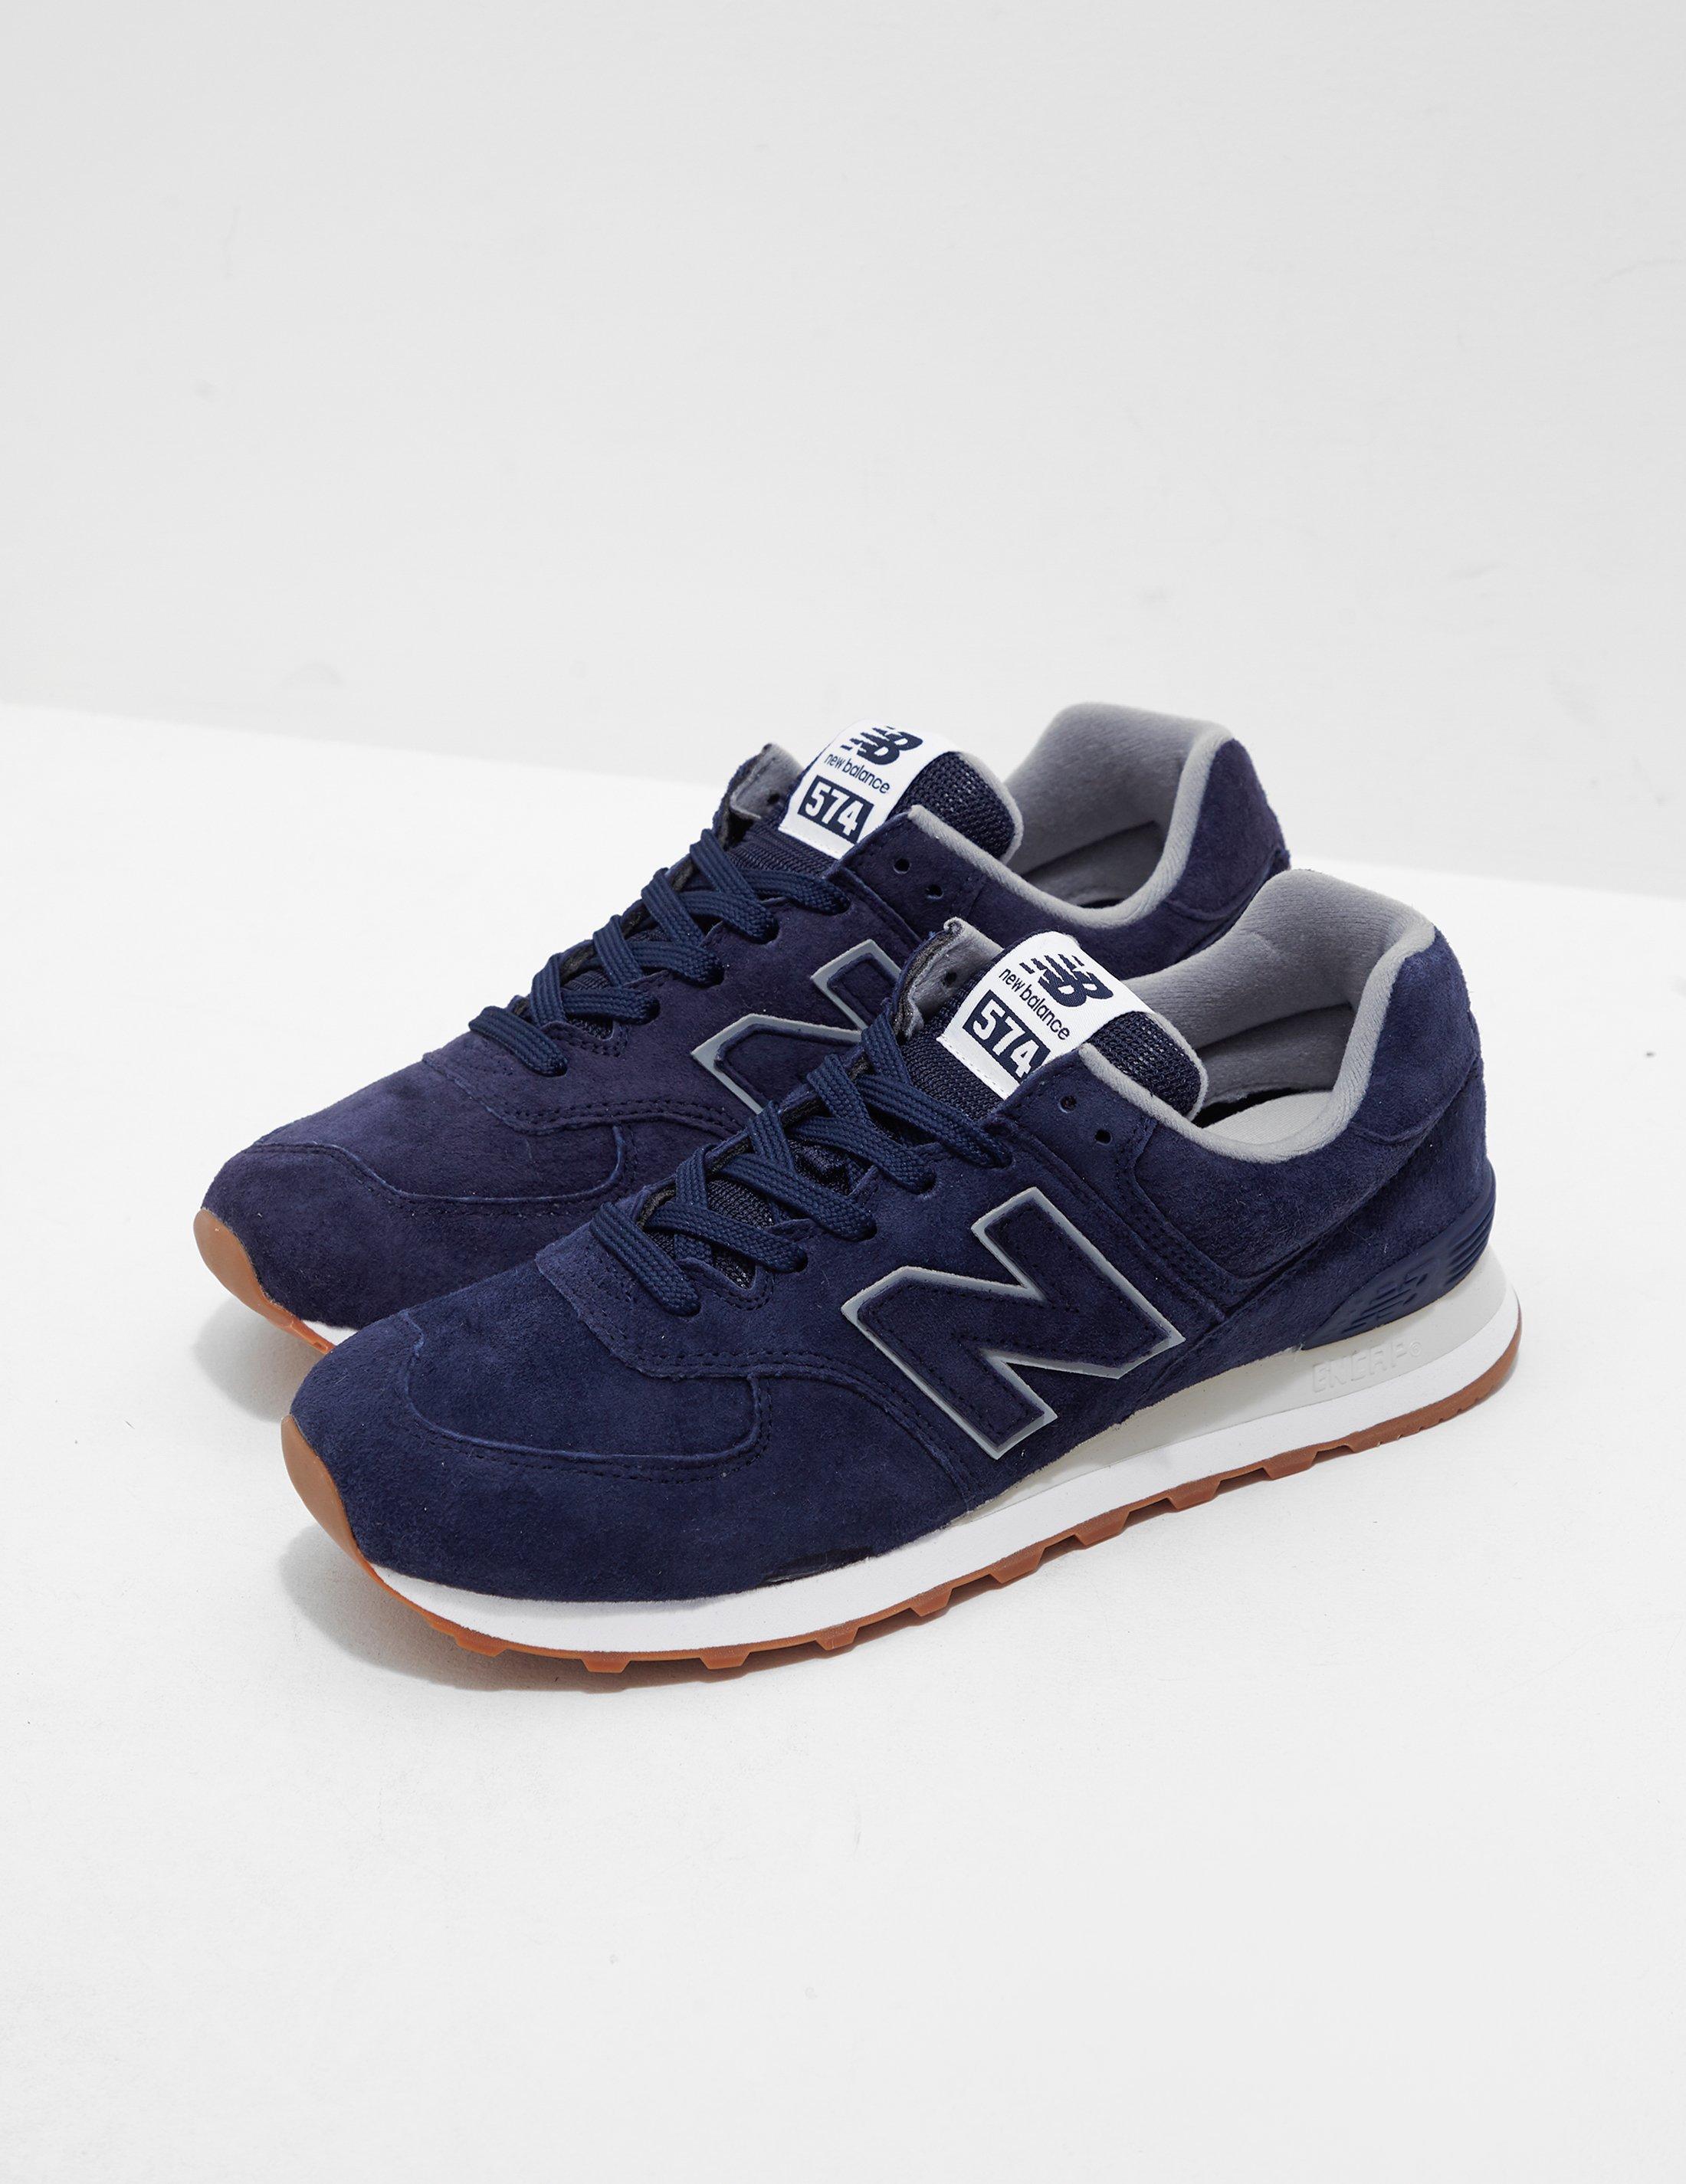 New Balance Suede 574 Navy Blue for Men - Lyst